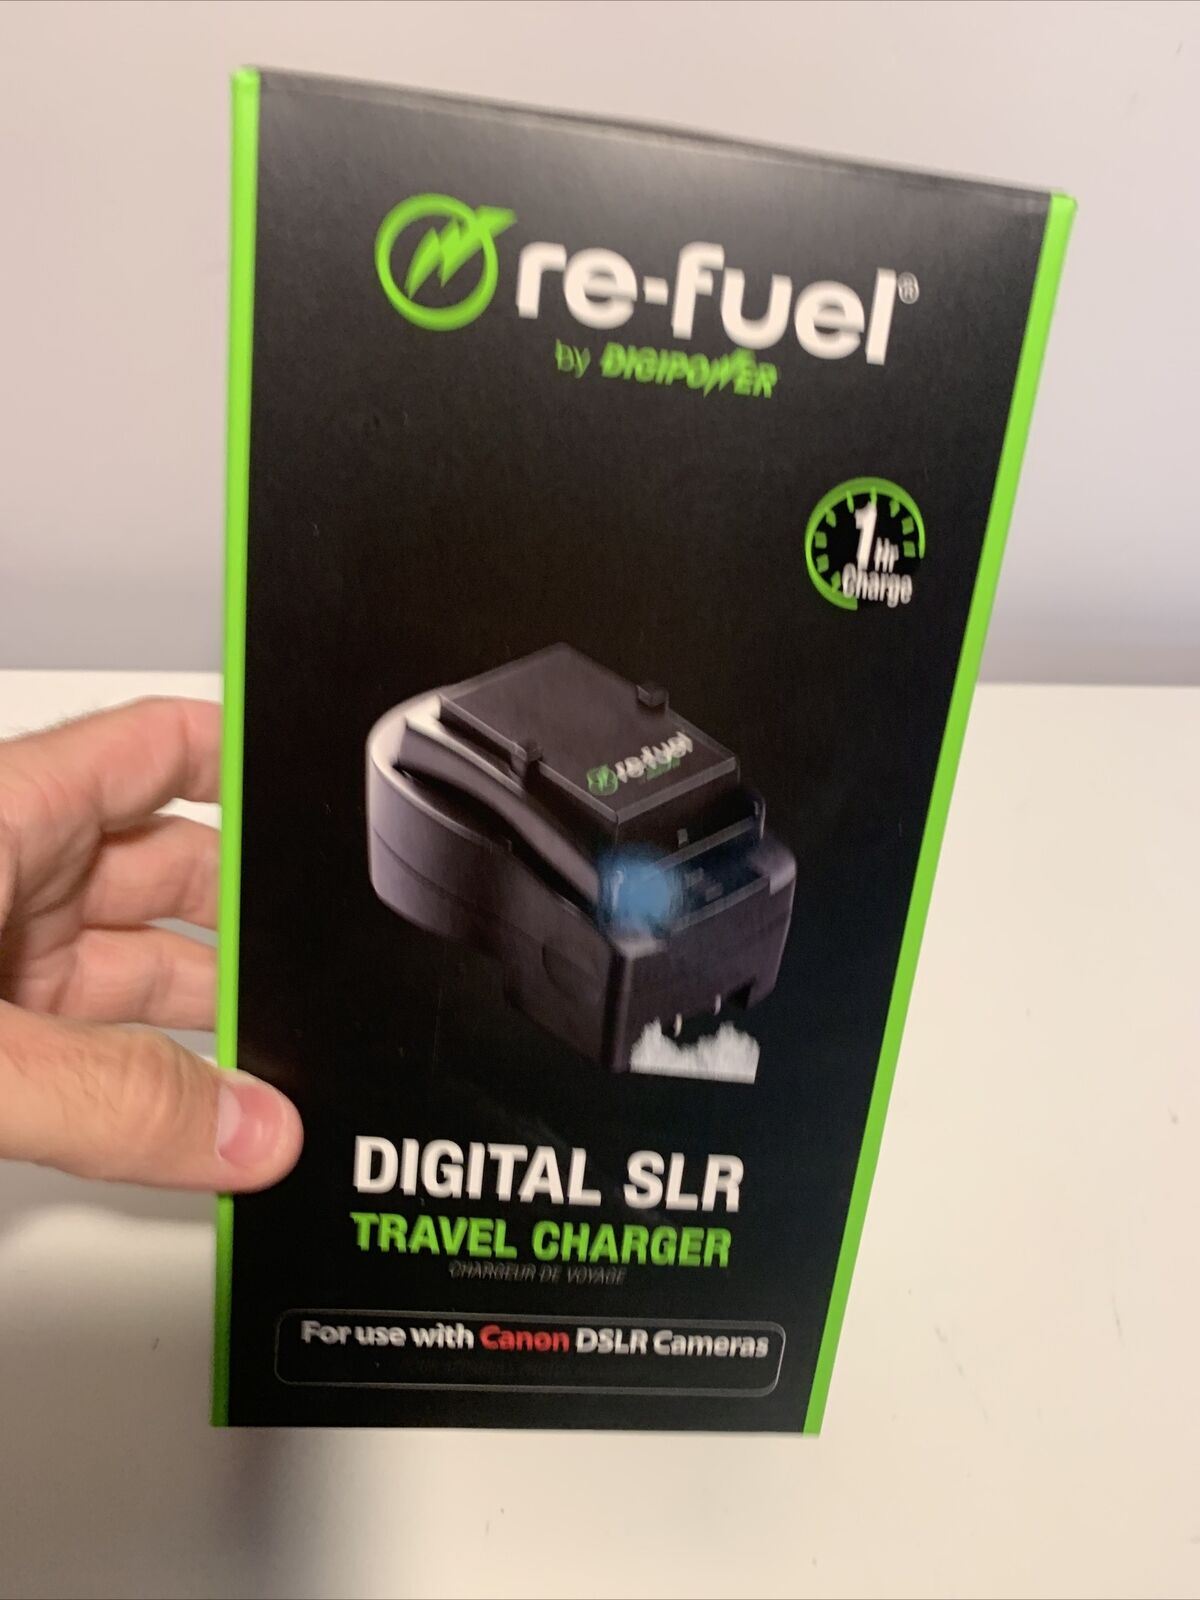 Re-Fuel Digital SLR Travel Charger for Use with Canon DSLR Cameras